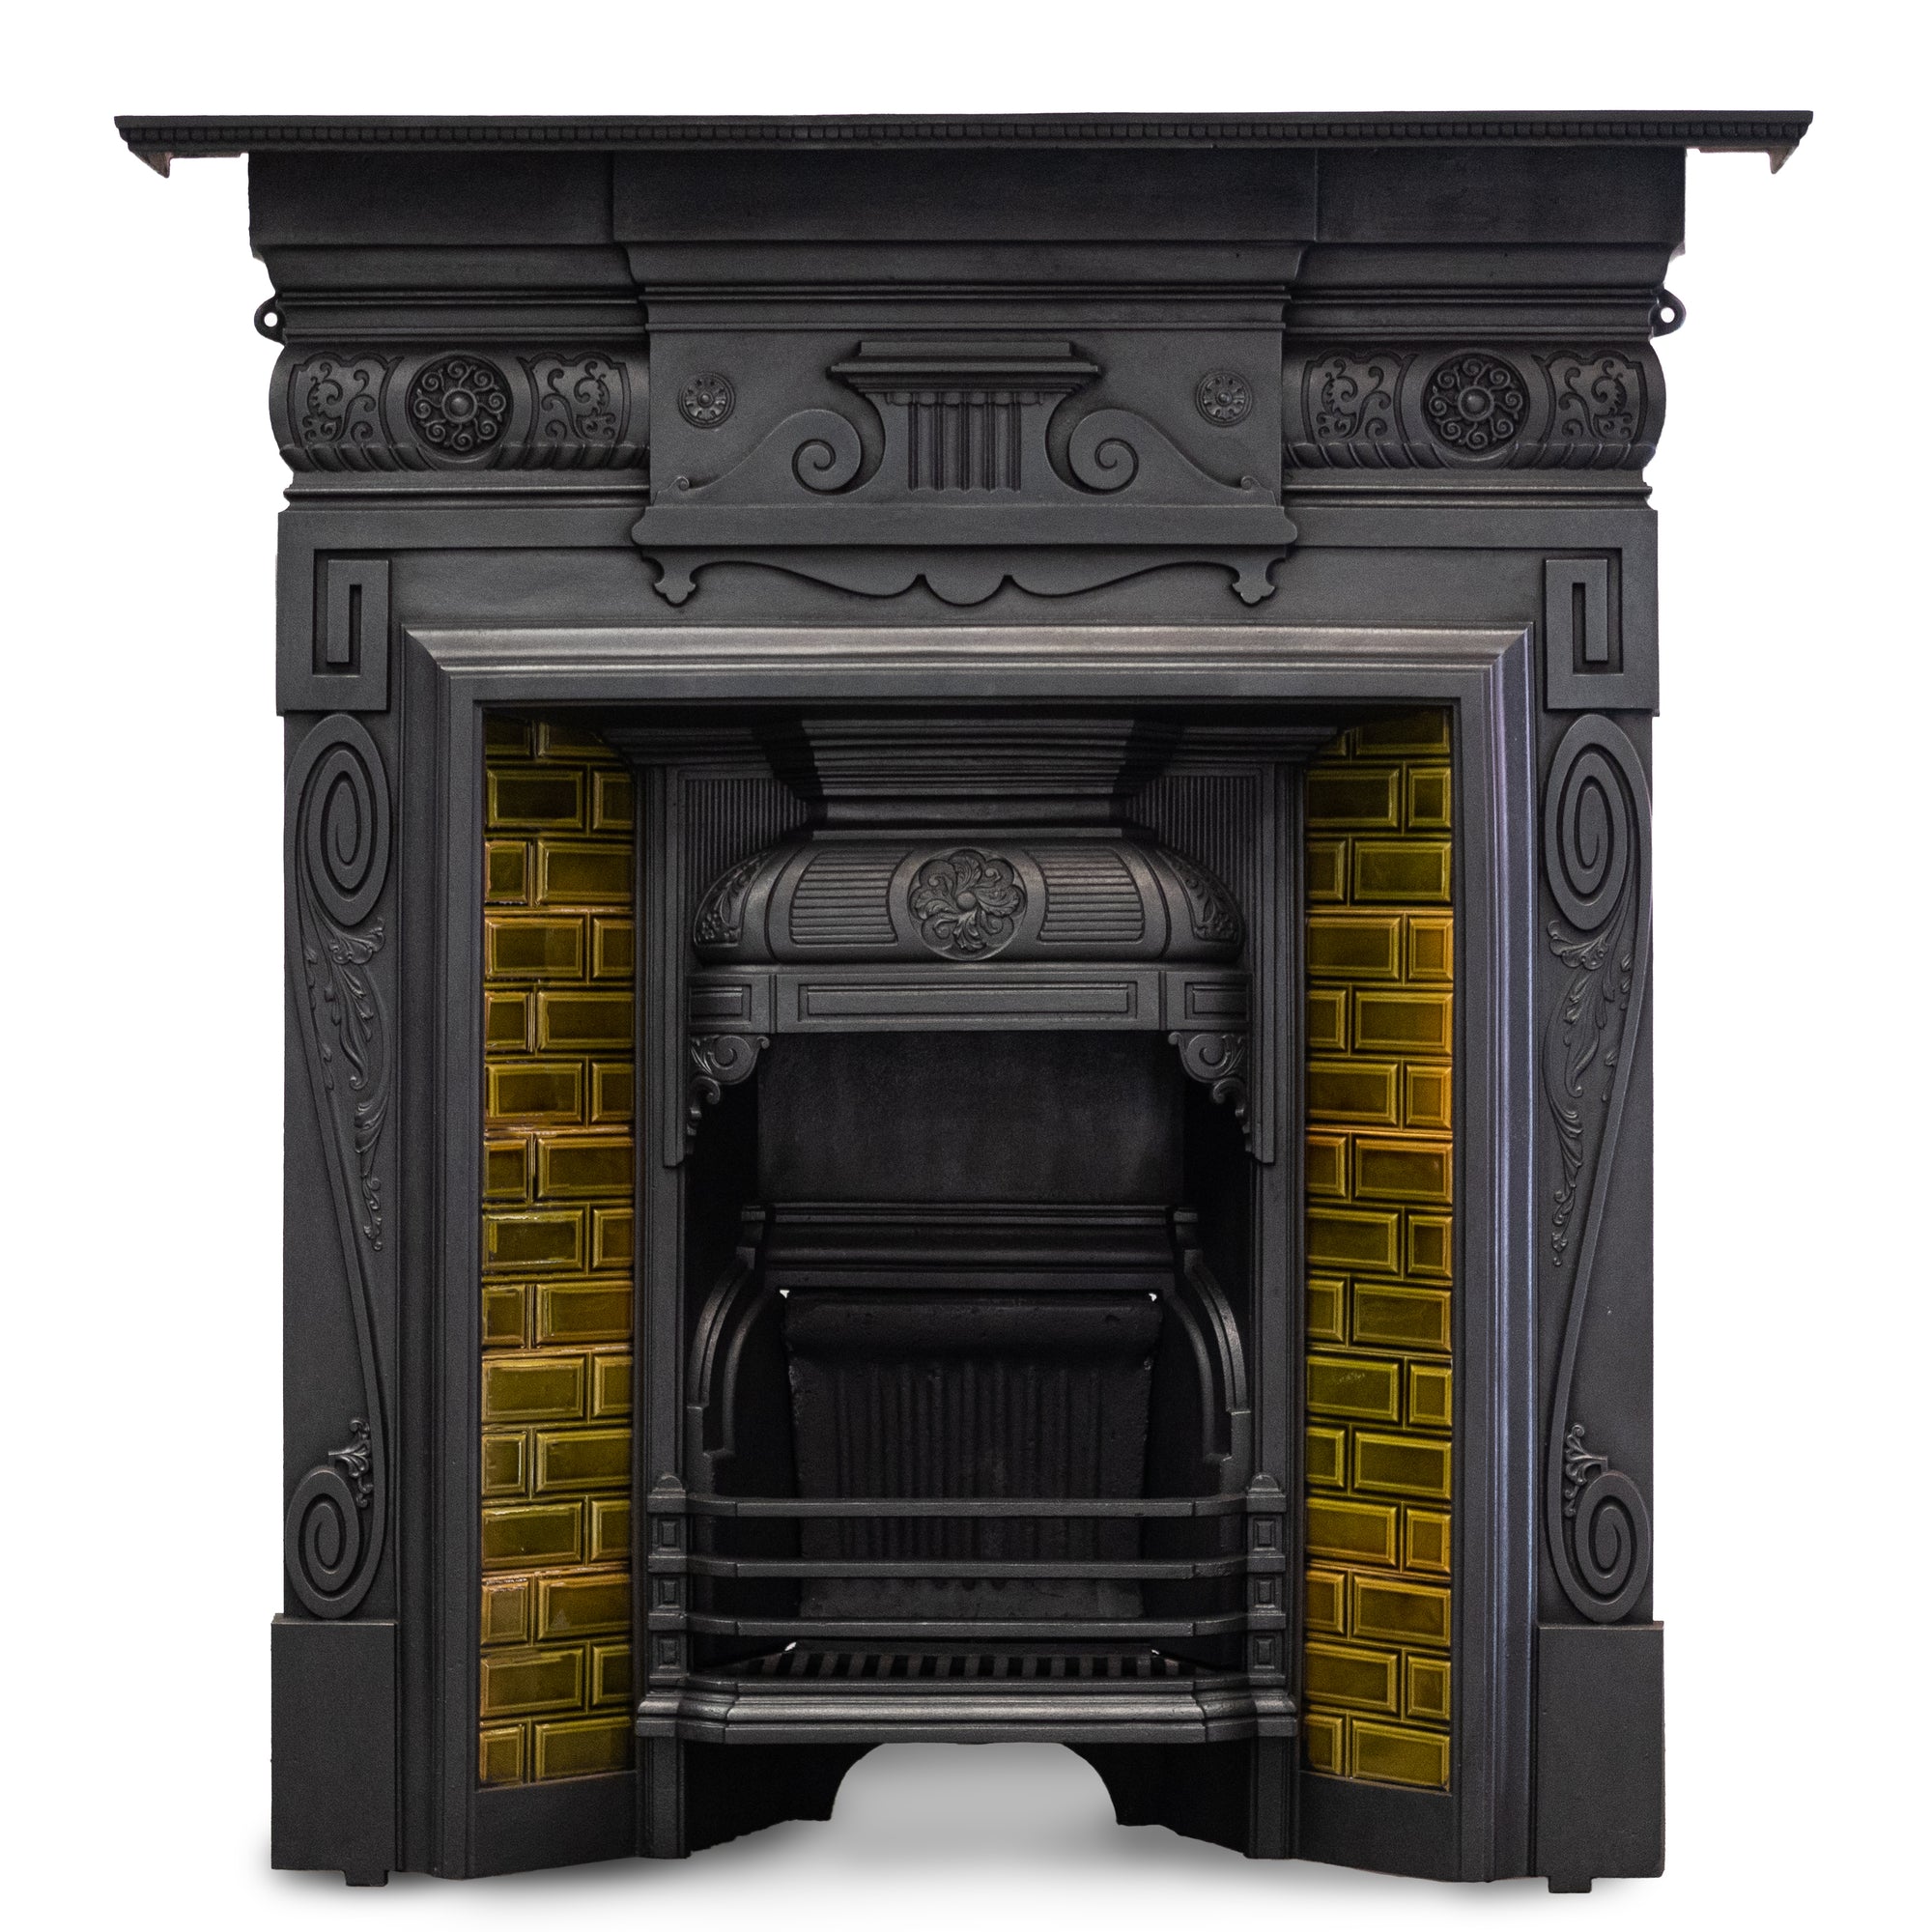 Antique Victorian Combination Fireplace with Green Tiles | The Architectural Forum